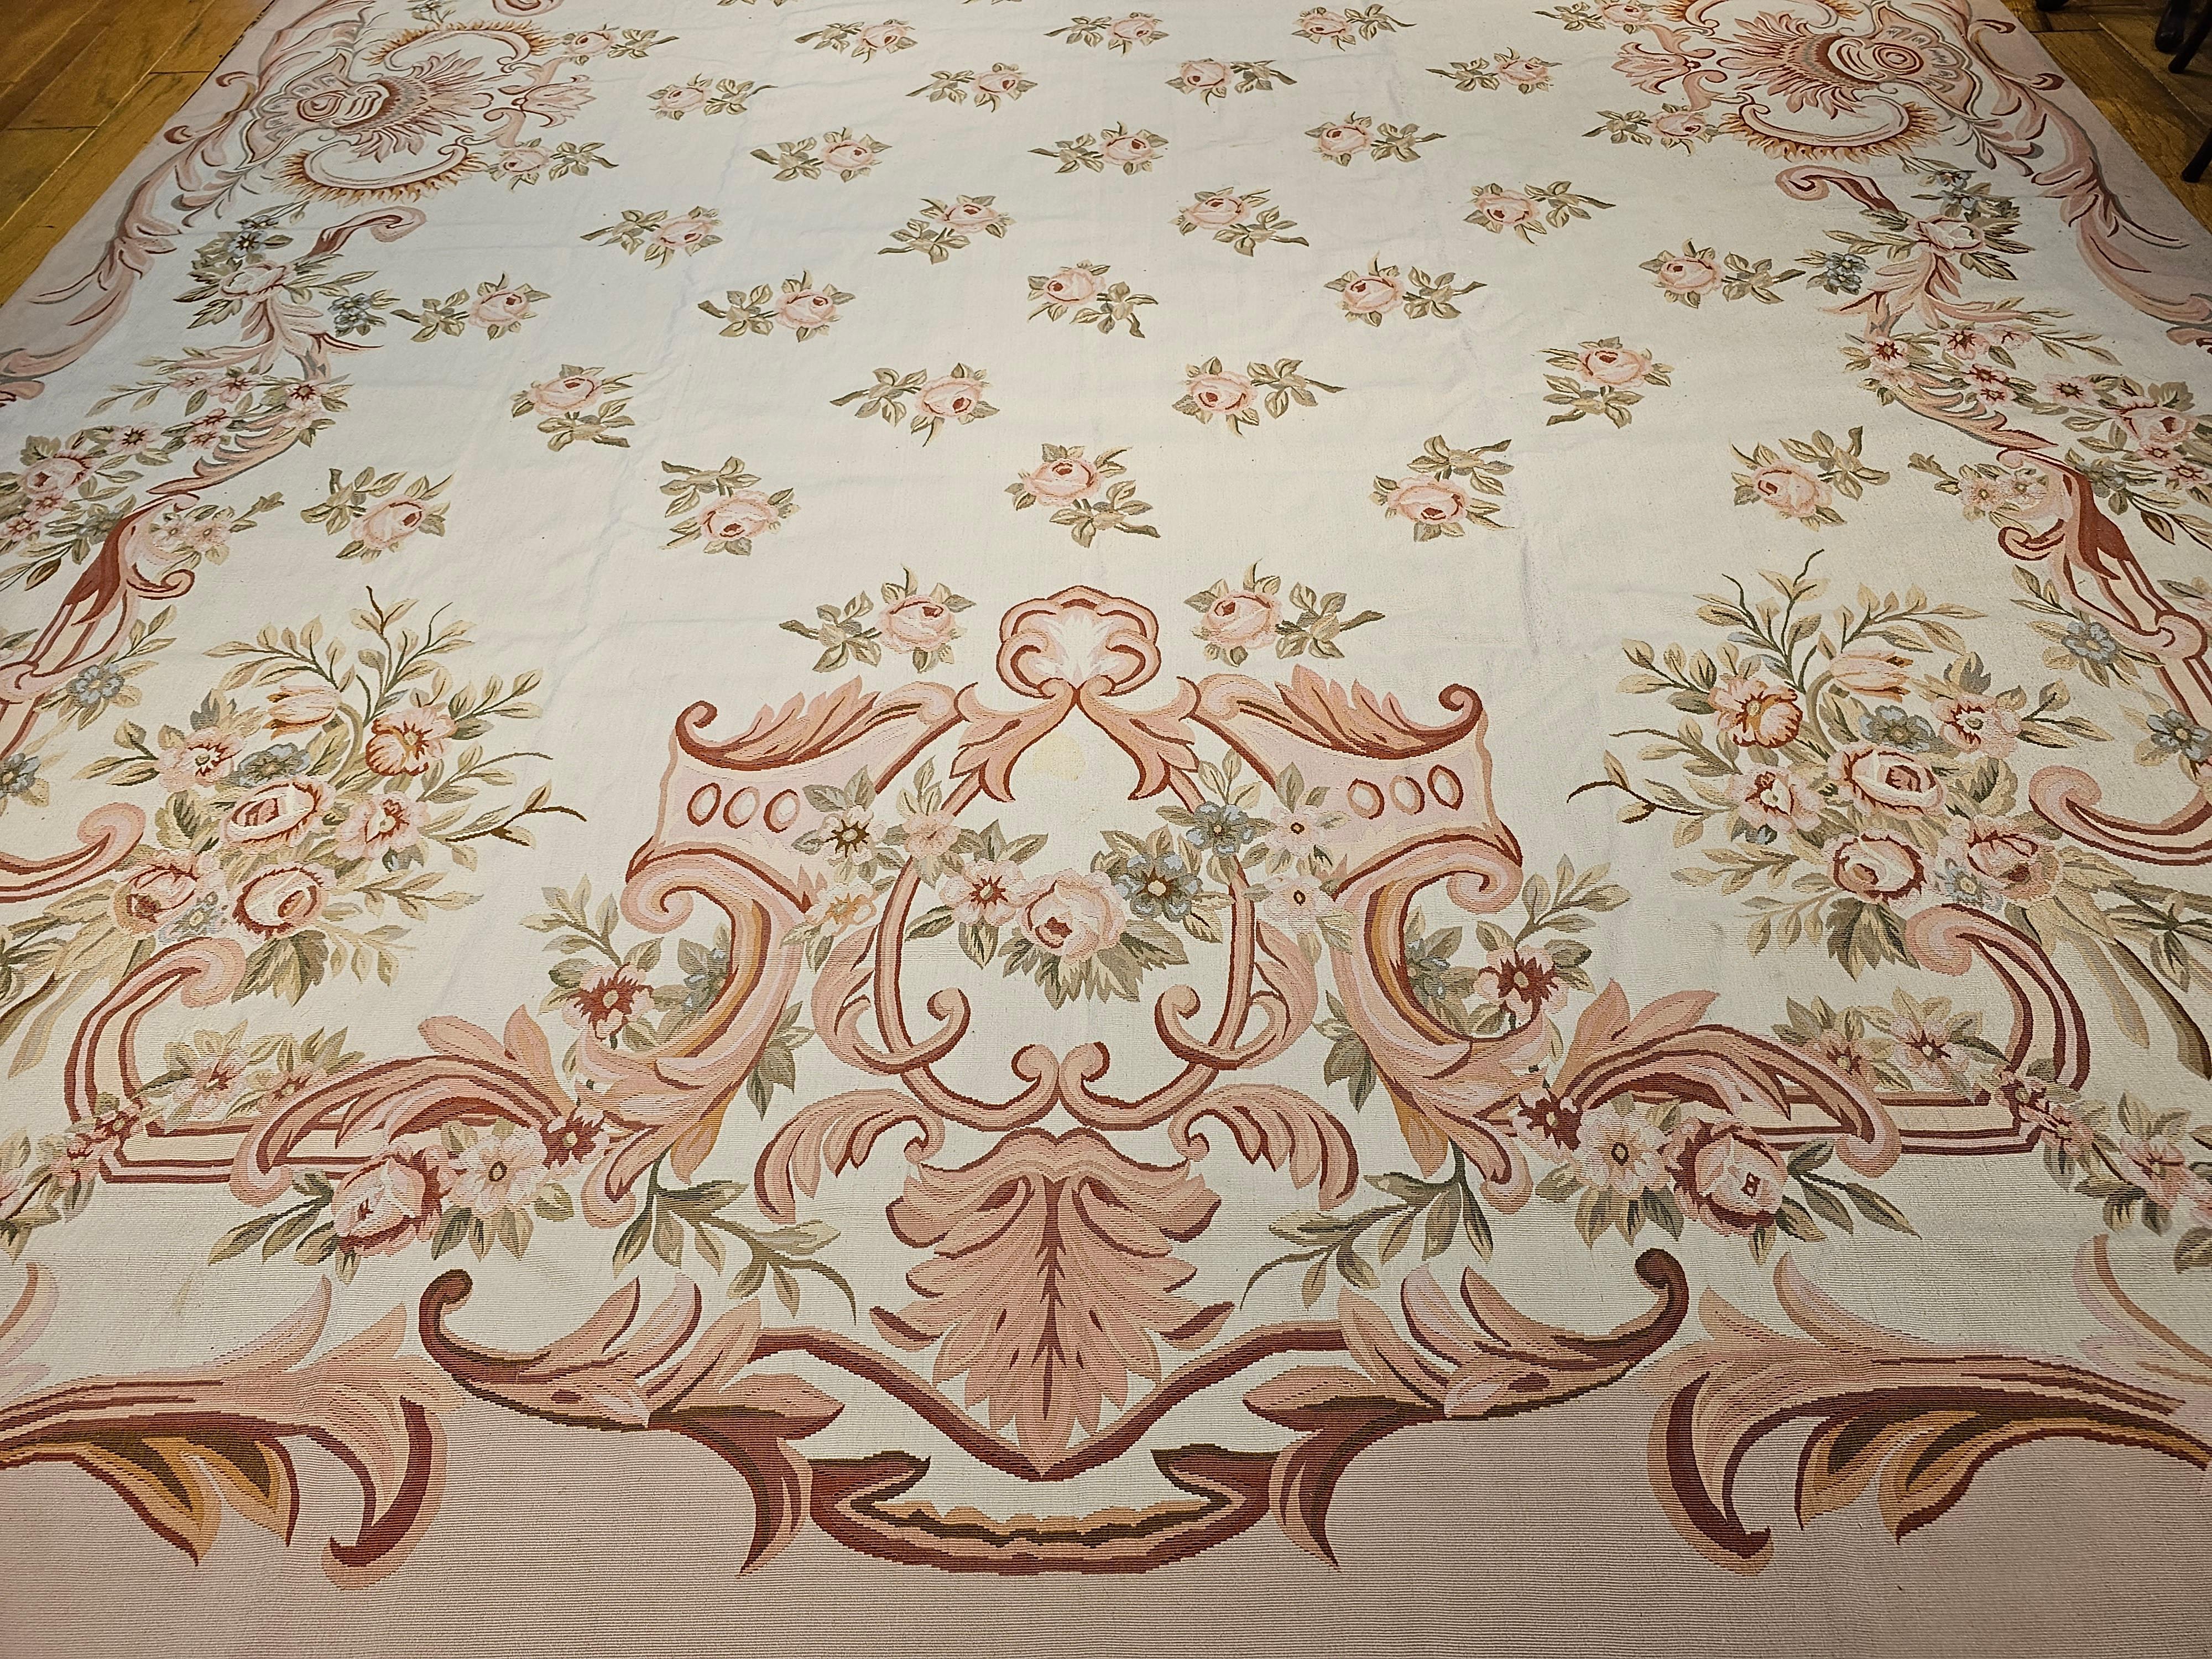 Hand-Woven Vintage Oversized Aubusson Design Carpet in Light Taupe, Sage, Pale Blue, Pink For Sale